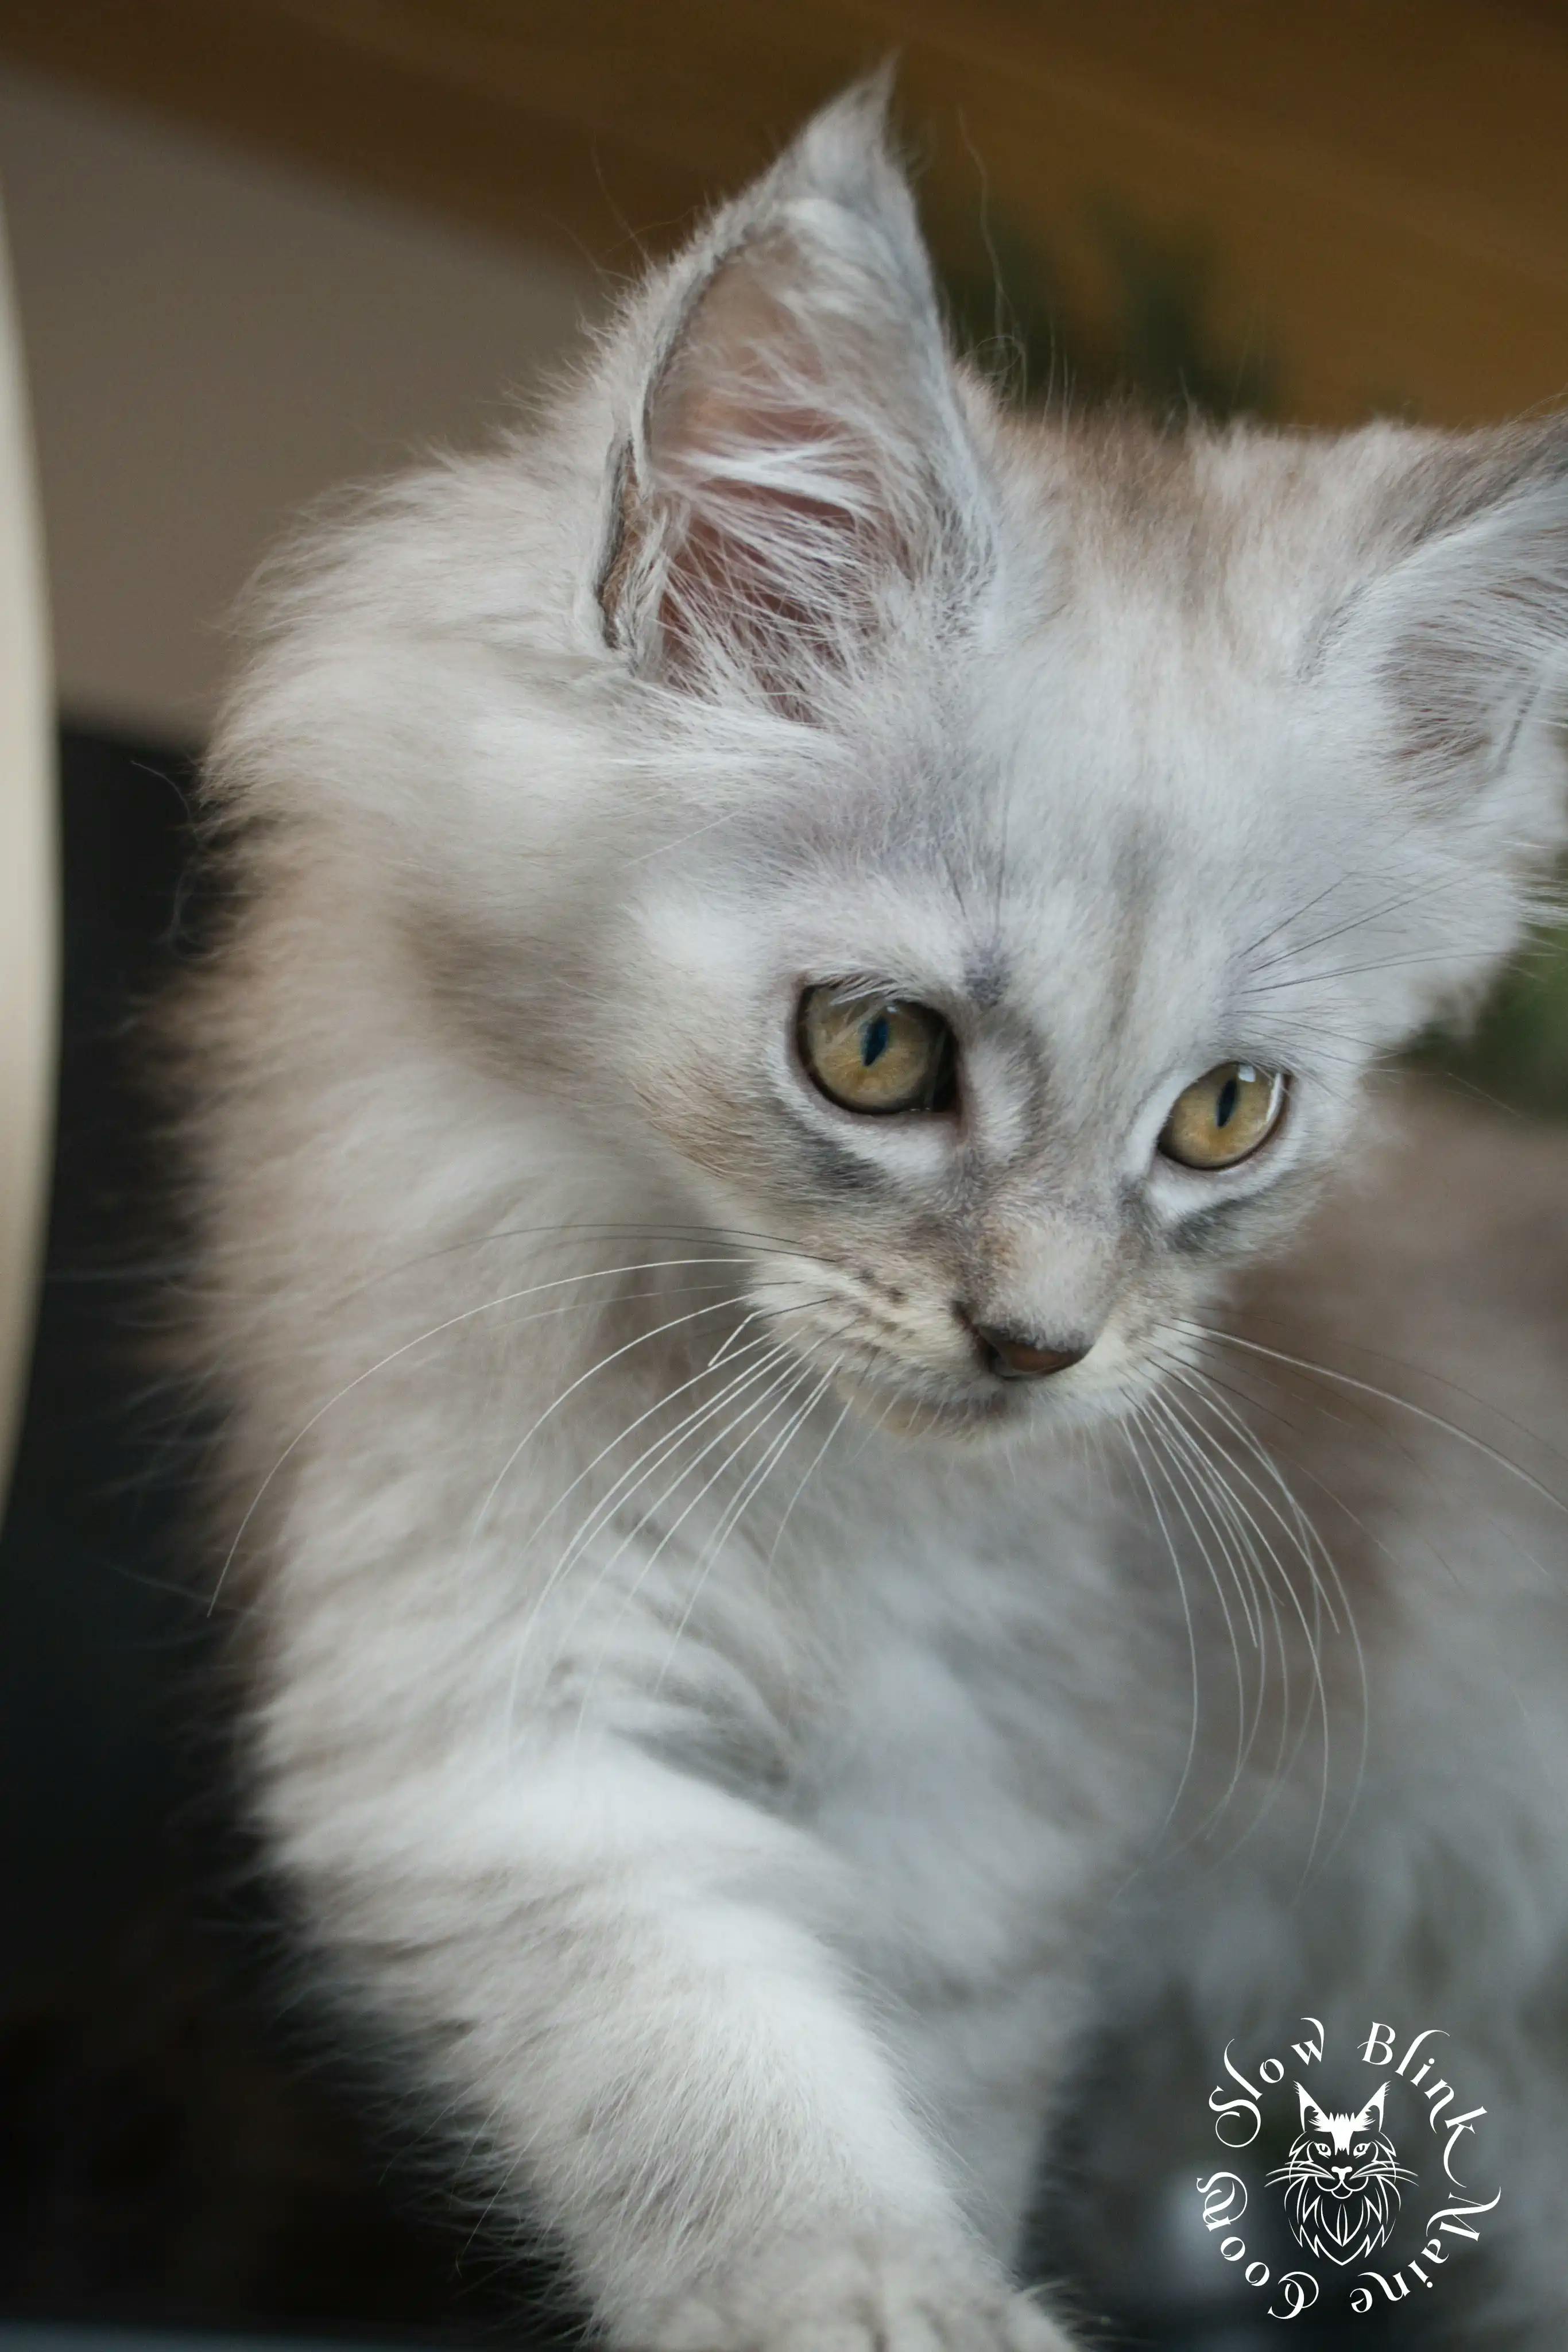 High Silver Maine Coon Kittens > black silver tabby maine coon kitten | ems code ns 22 23 24 25 | slowblinkmainecoons | 598